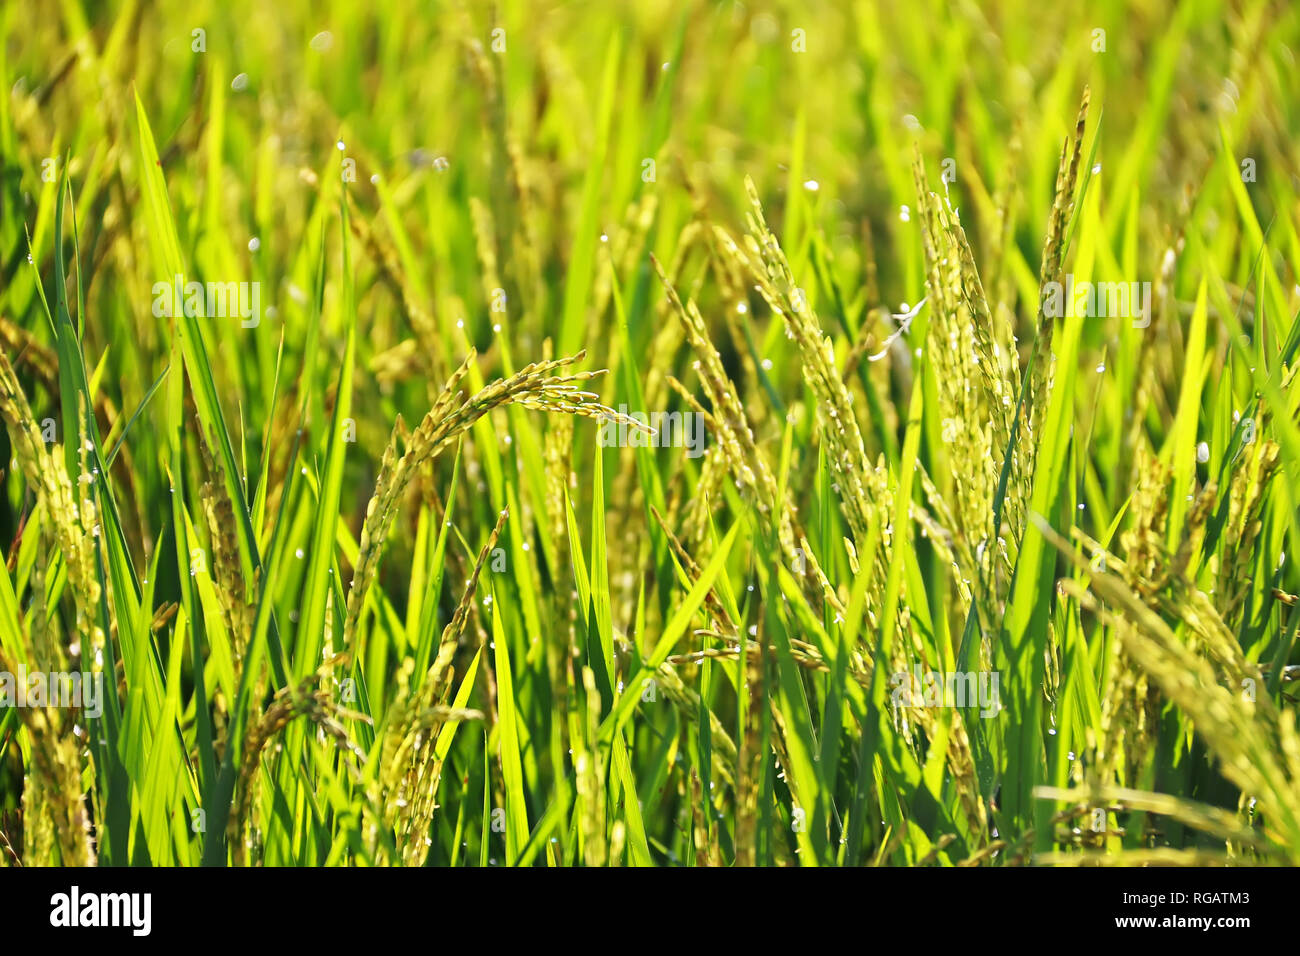 Close-up of yellow paddy rice field waiting for harvest in Thailand Stock Photo